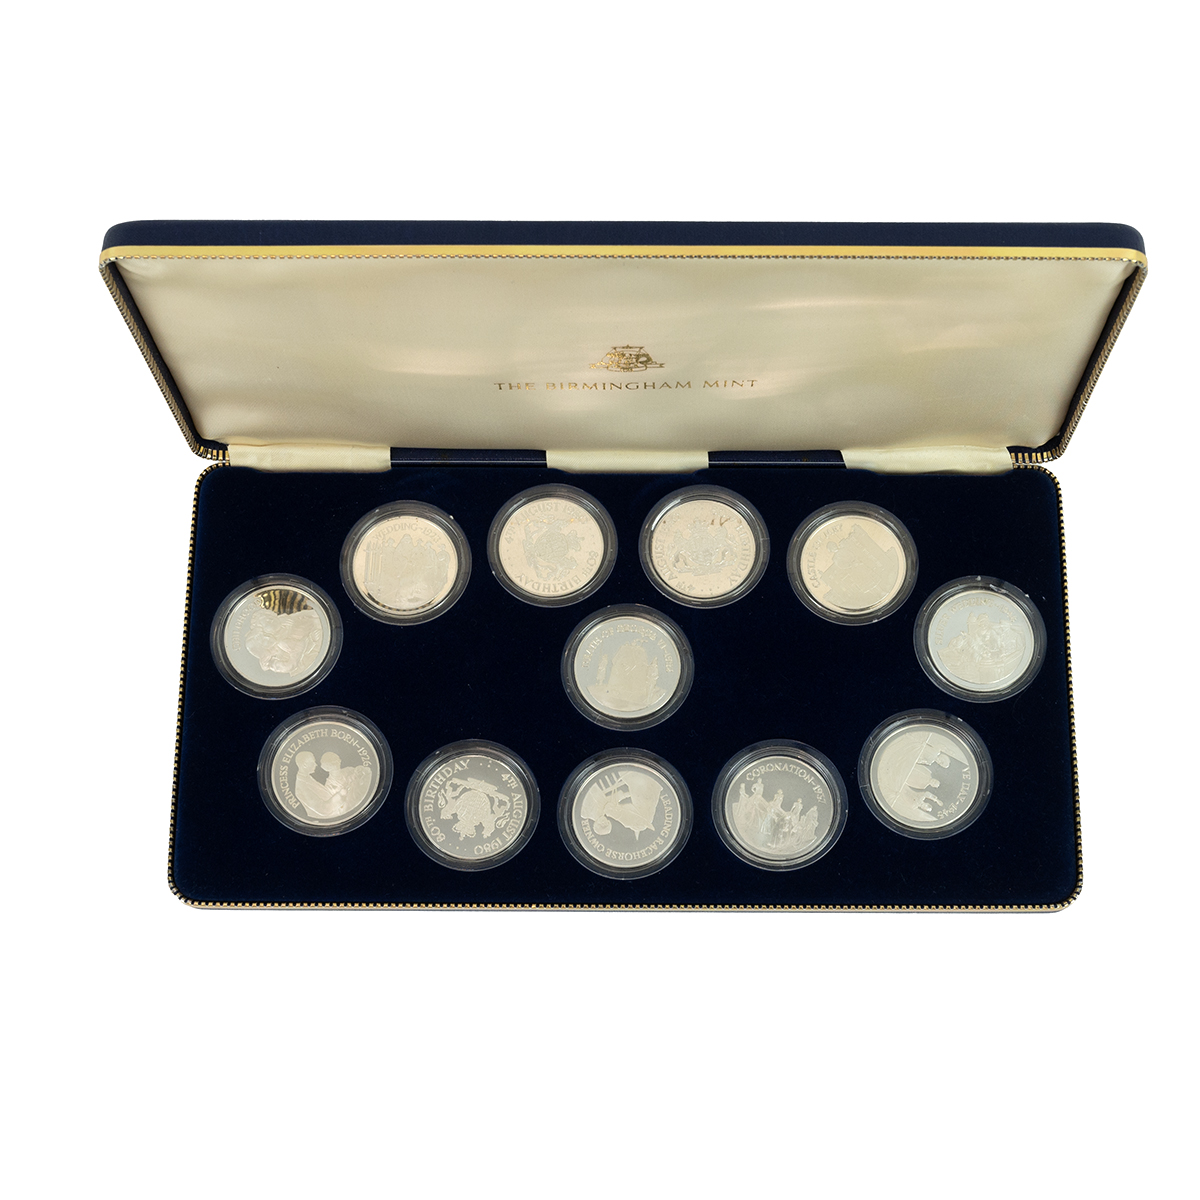 1980 Queen Mother 80th Birthday 925 silver proof 12-coin medal set from The Birmingham Mint. Weig... - Bild 2 aus 2